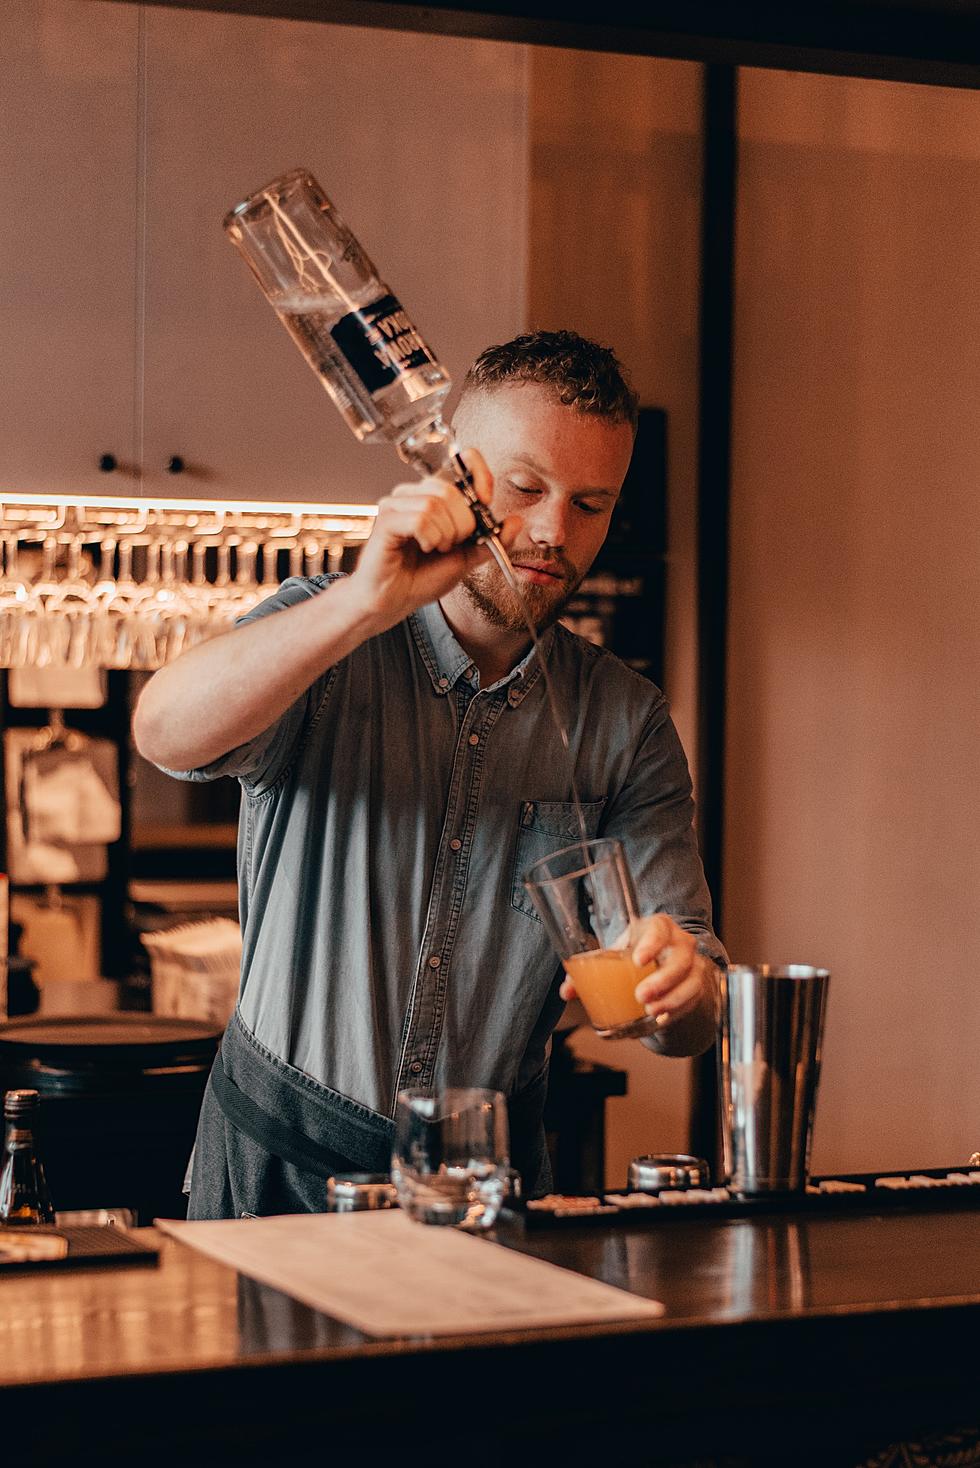 Who’s Your Favorite Bartender in Southwest Michigan?